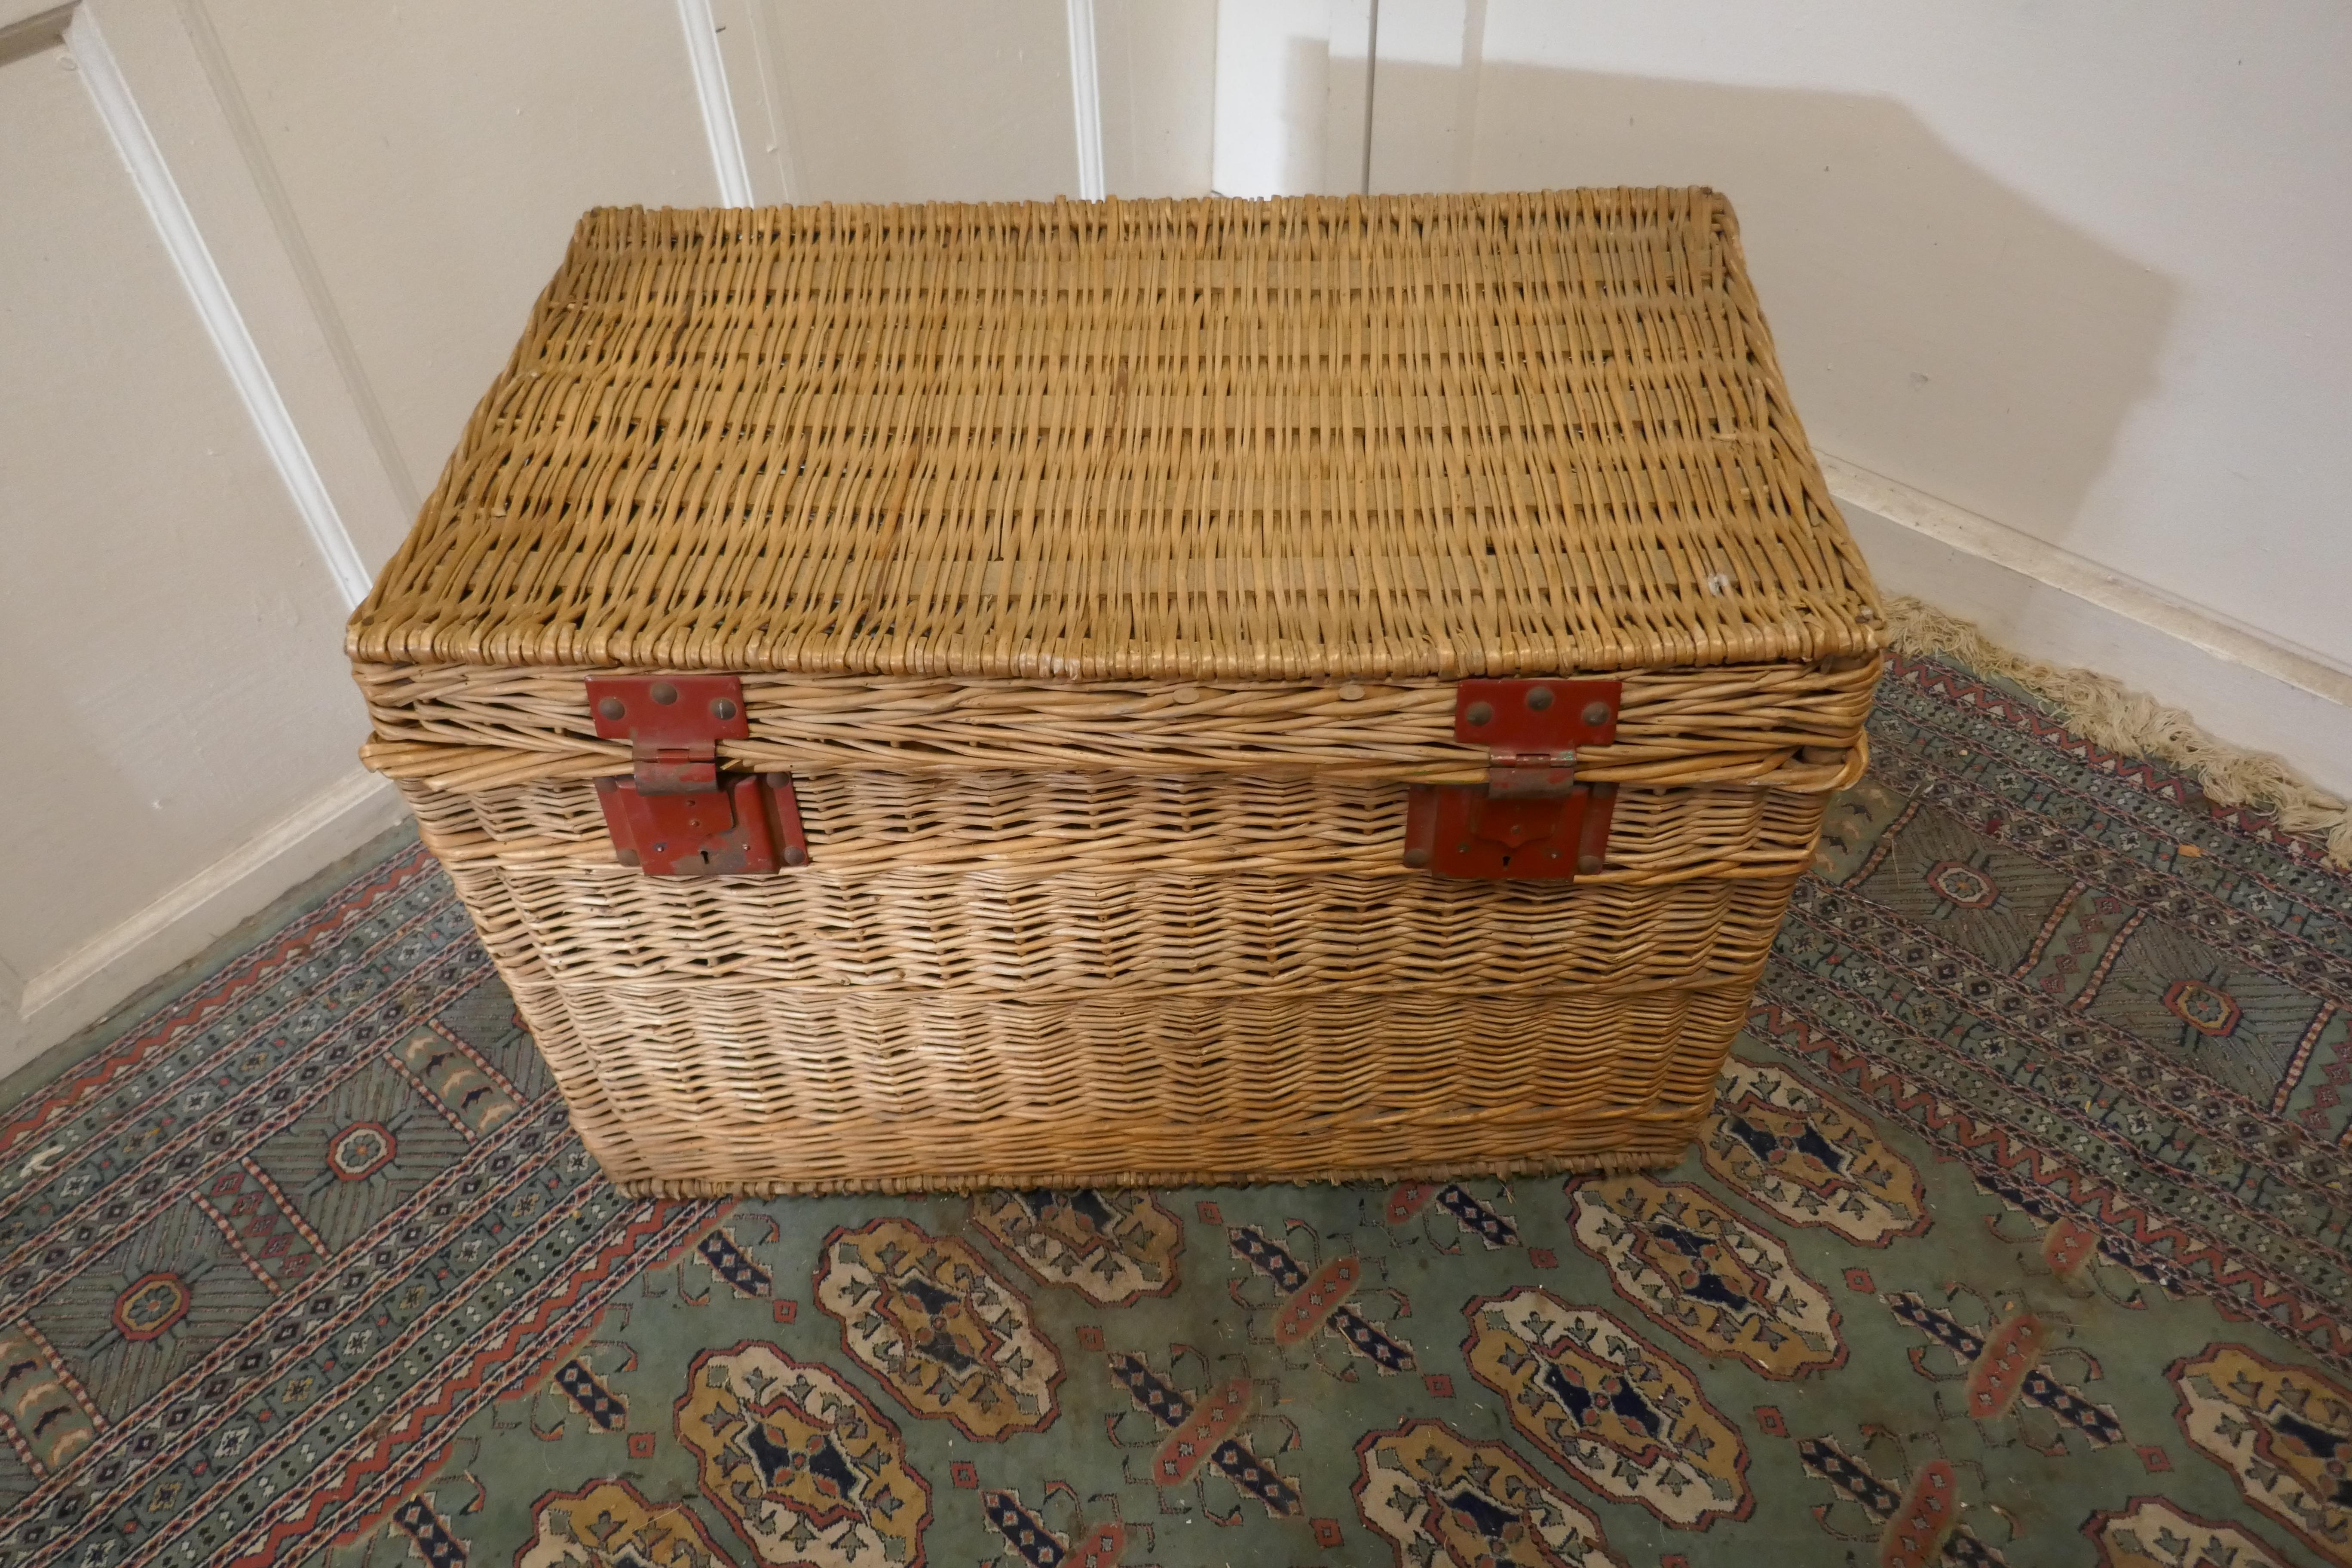 French antique Wicker laundry basket or Linen Hamper

This is an excellent example and in remarkably good condition for its age, the basket originates from a French Hotel, it has woven carrying handles
The Hamper has a good strong lid and metal